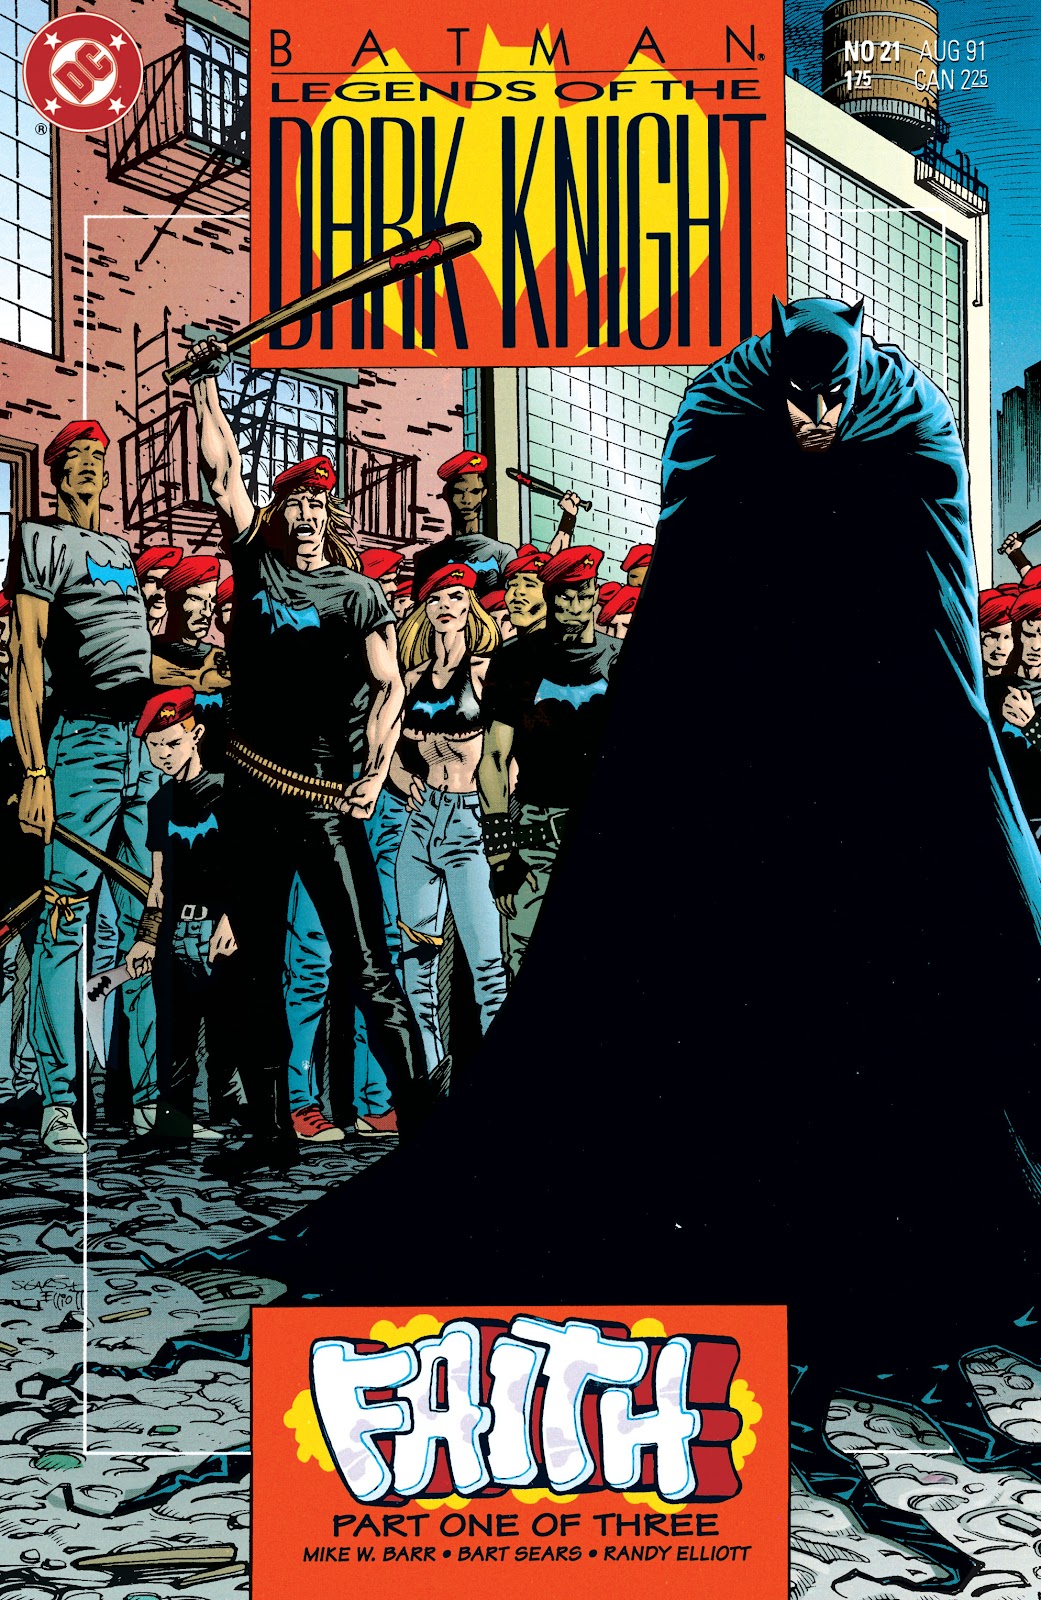 Batman: Legends of the Dark Knight issue 21 - Page 1